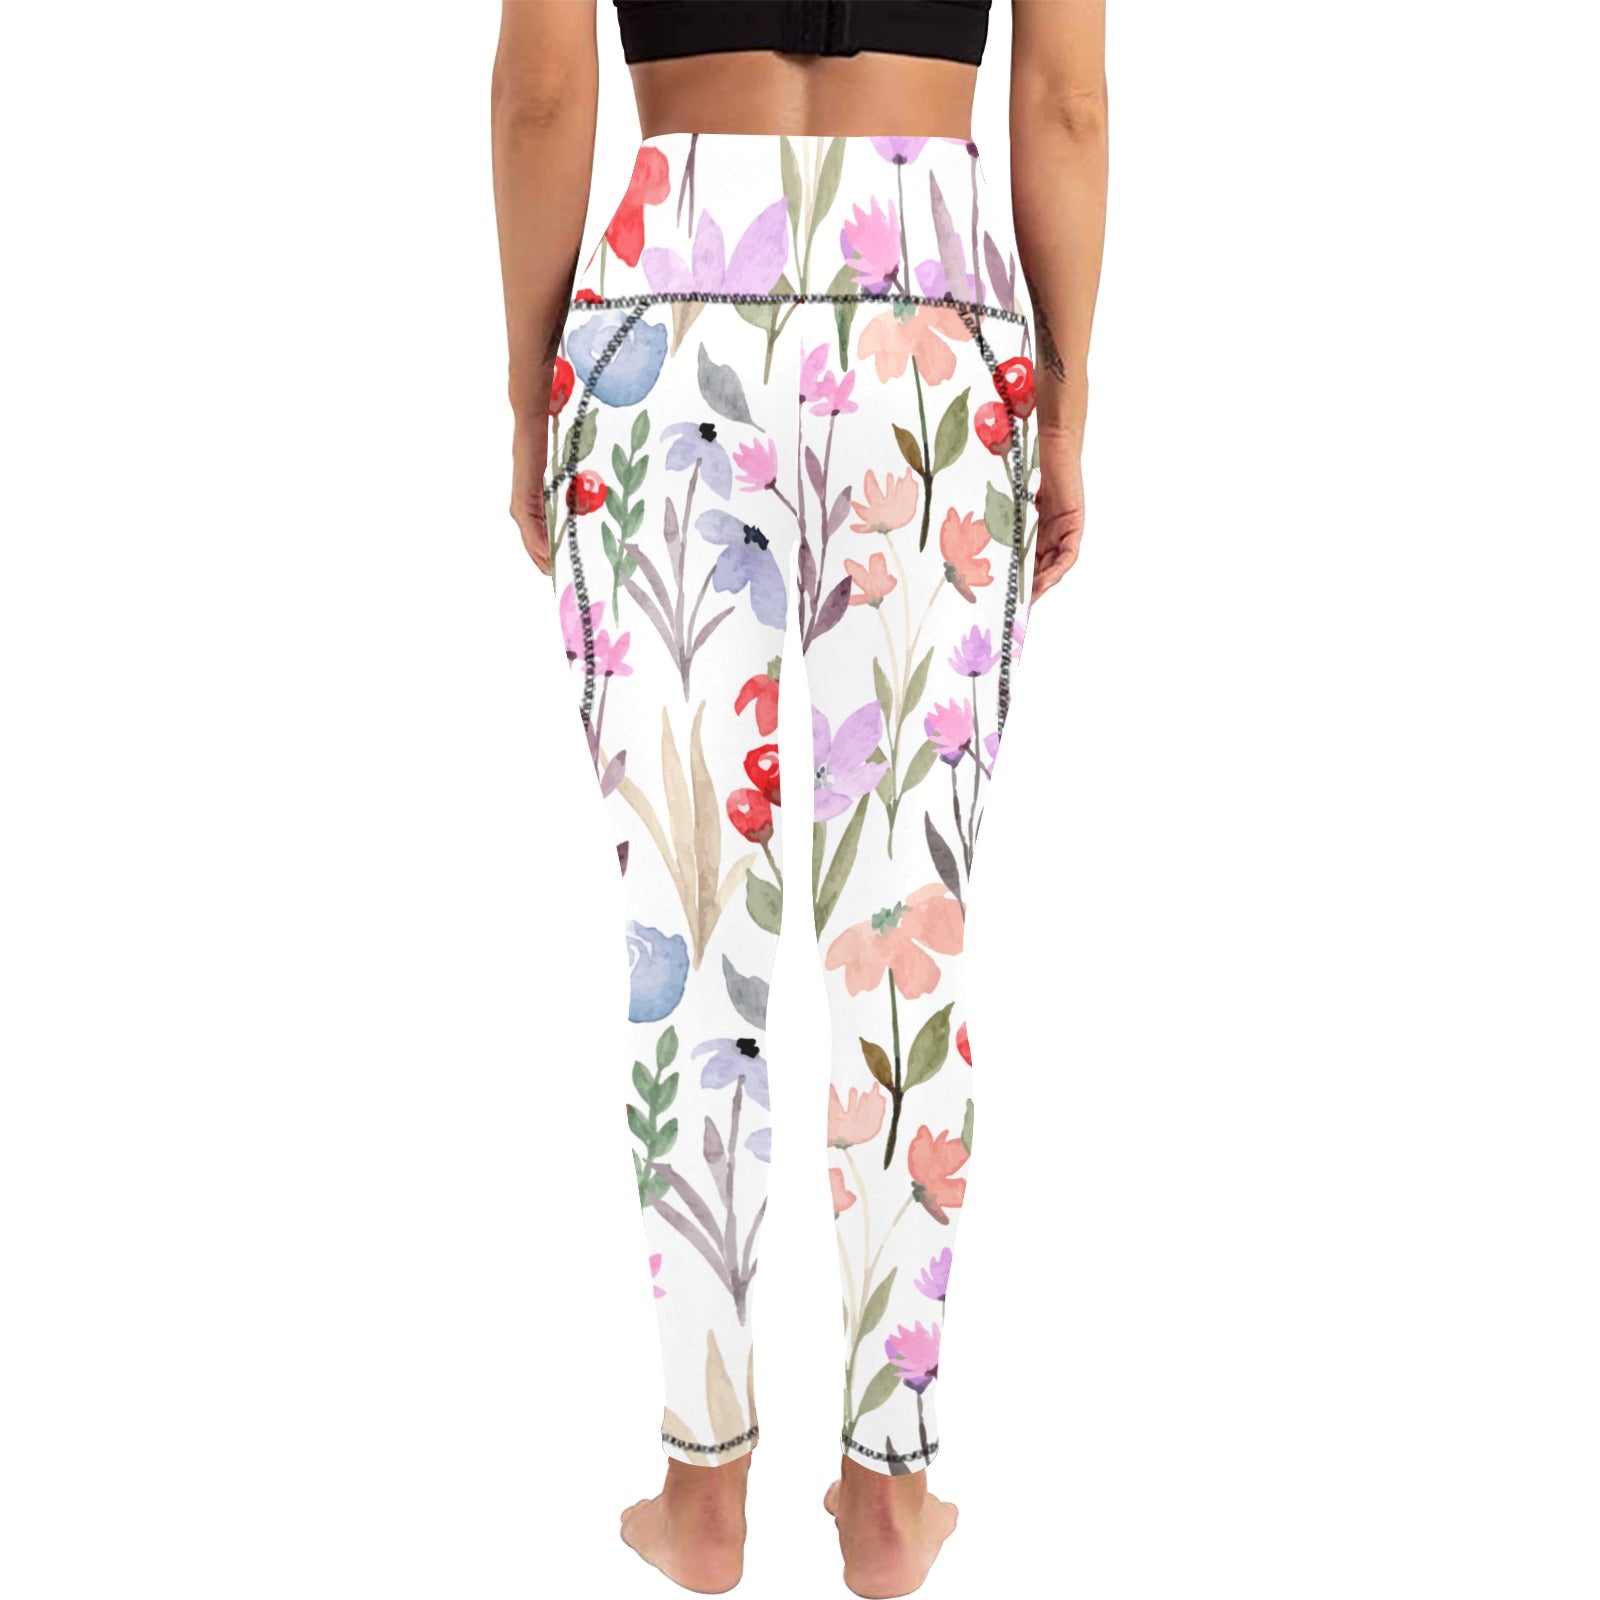 Floral Watercolour - Women's Leggings with Pockets Women's Leggings with Pockets S - 2XL Plants